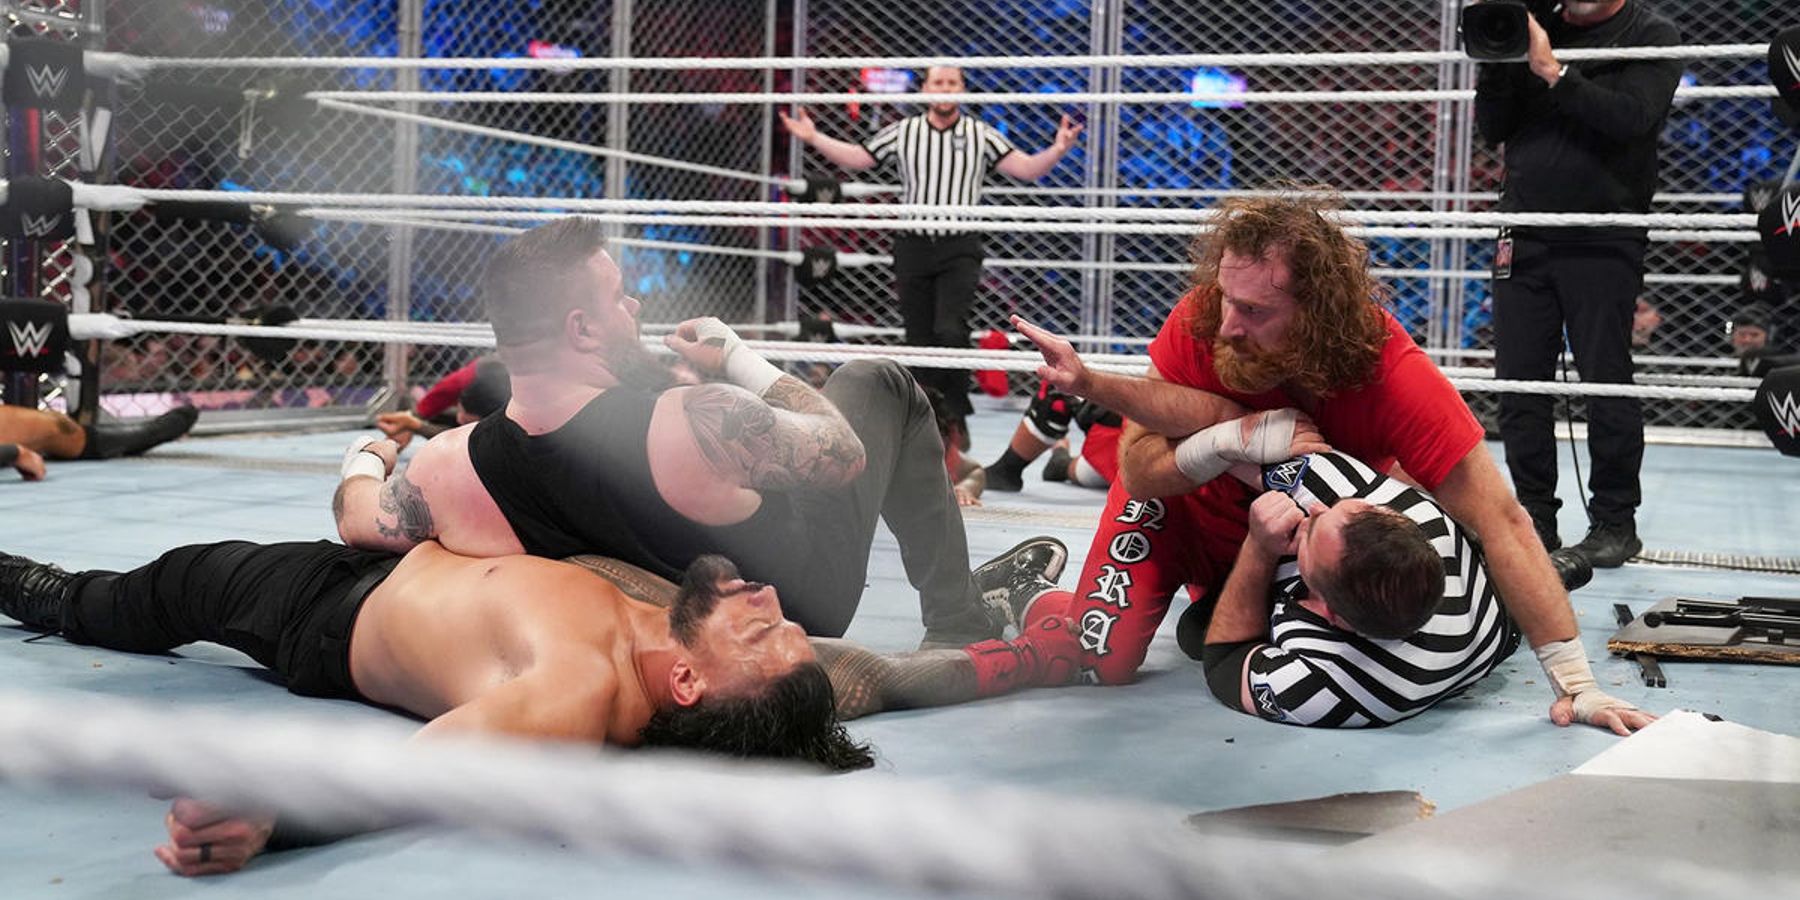 Sami Zayn prevents Kevin Owens from pinning Roman Reigns during a WarGames match at WWE Survivor Series.